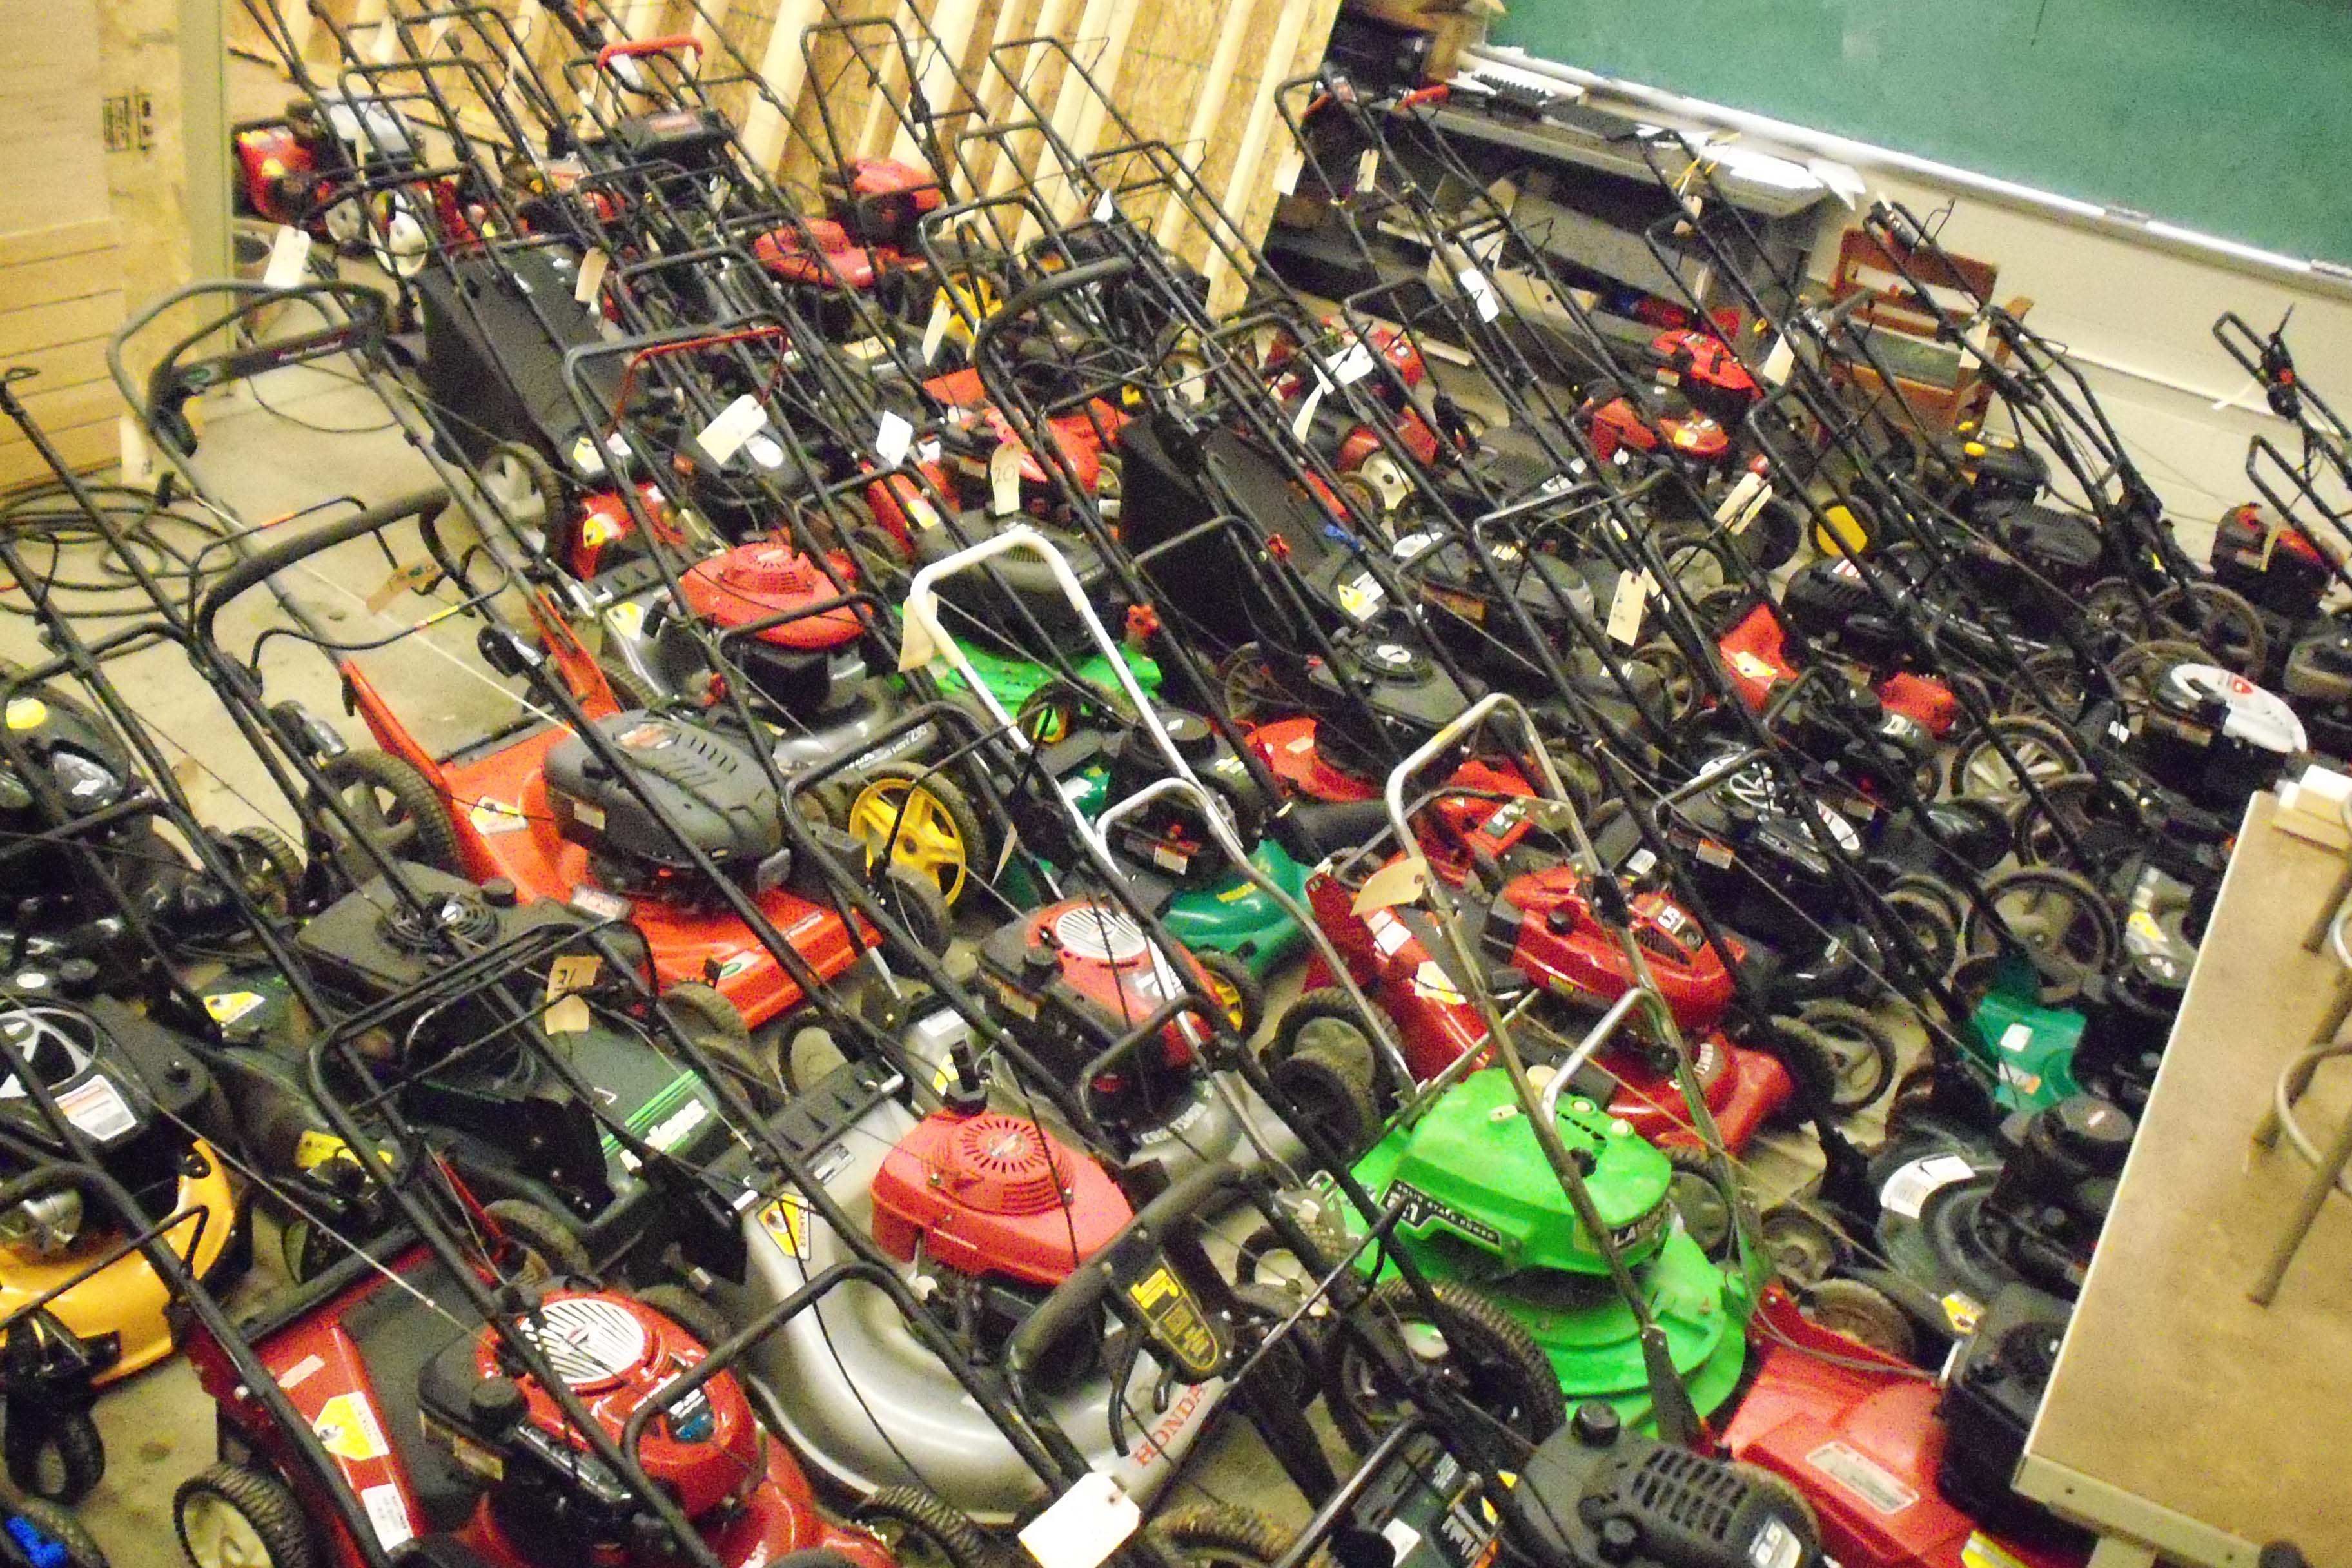 That's a lot of lawnmowers!